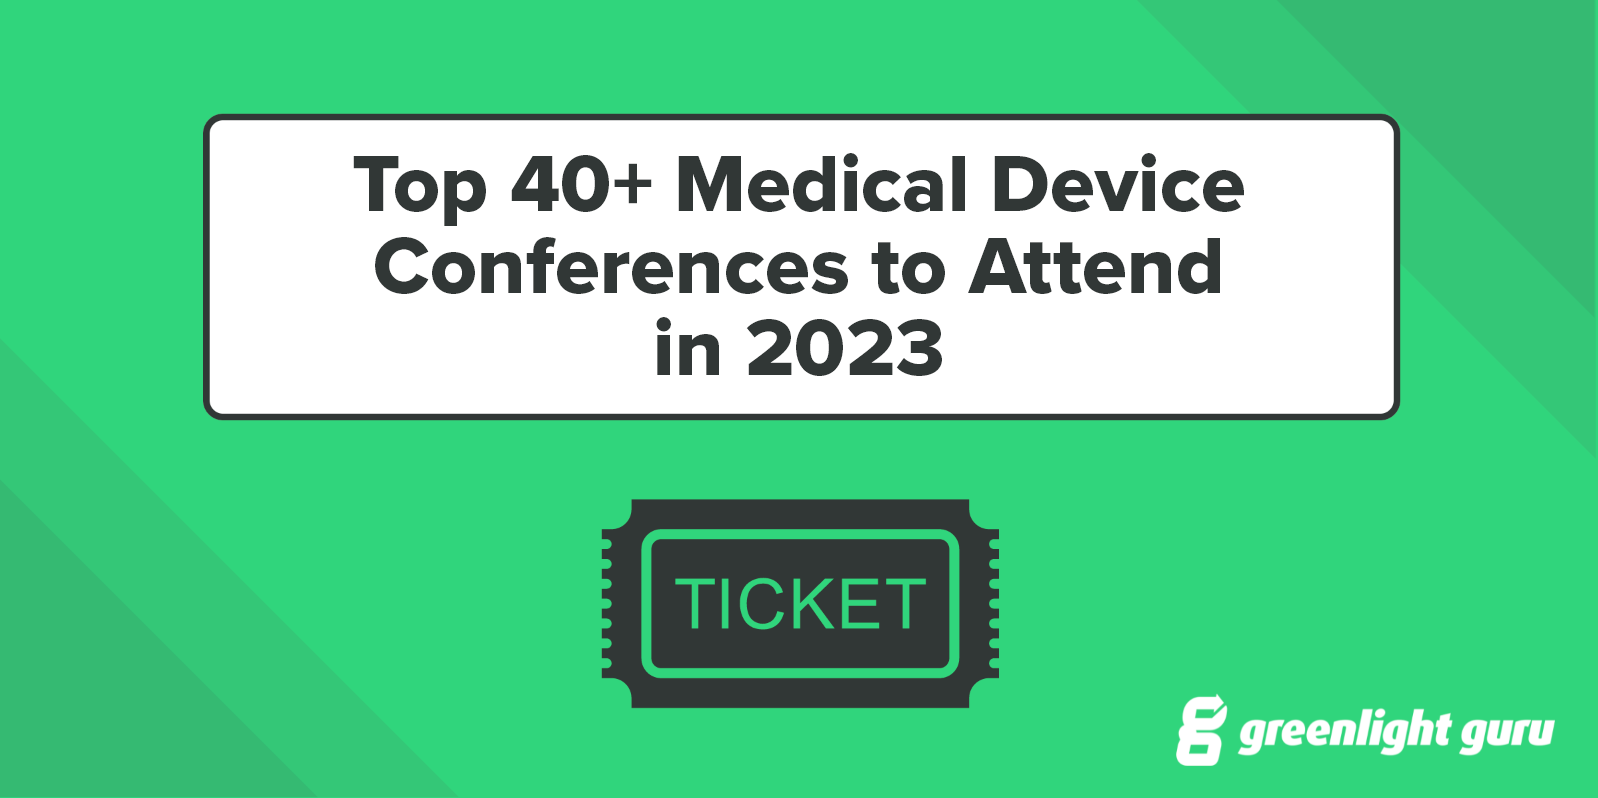 Top 40+ Medical Device Conferences To Attend in 2023